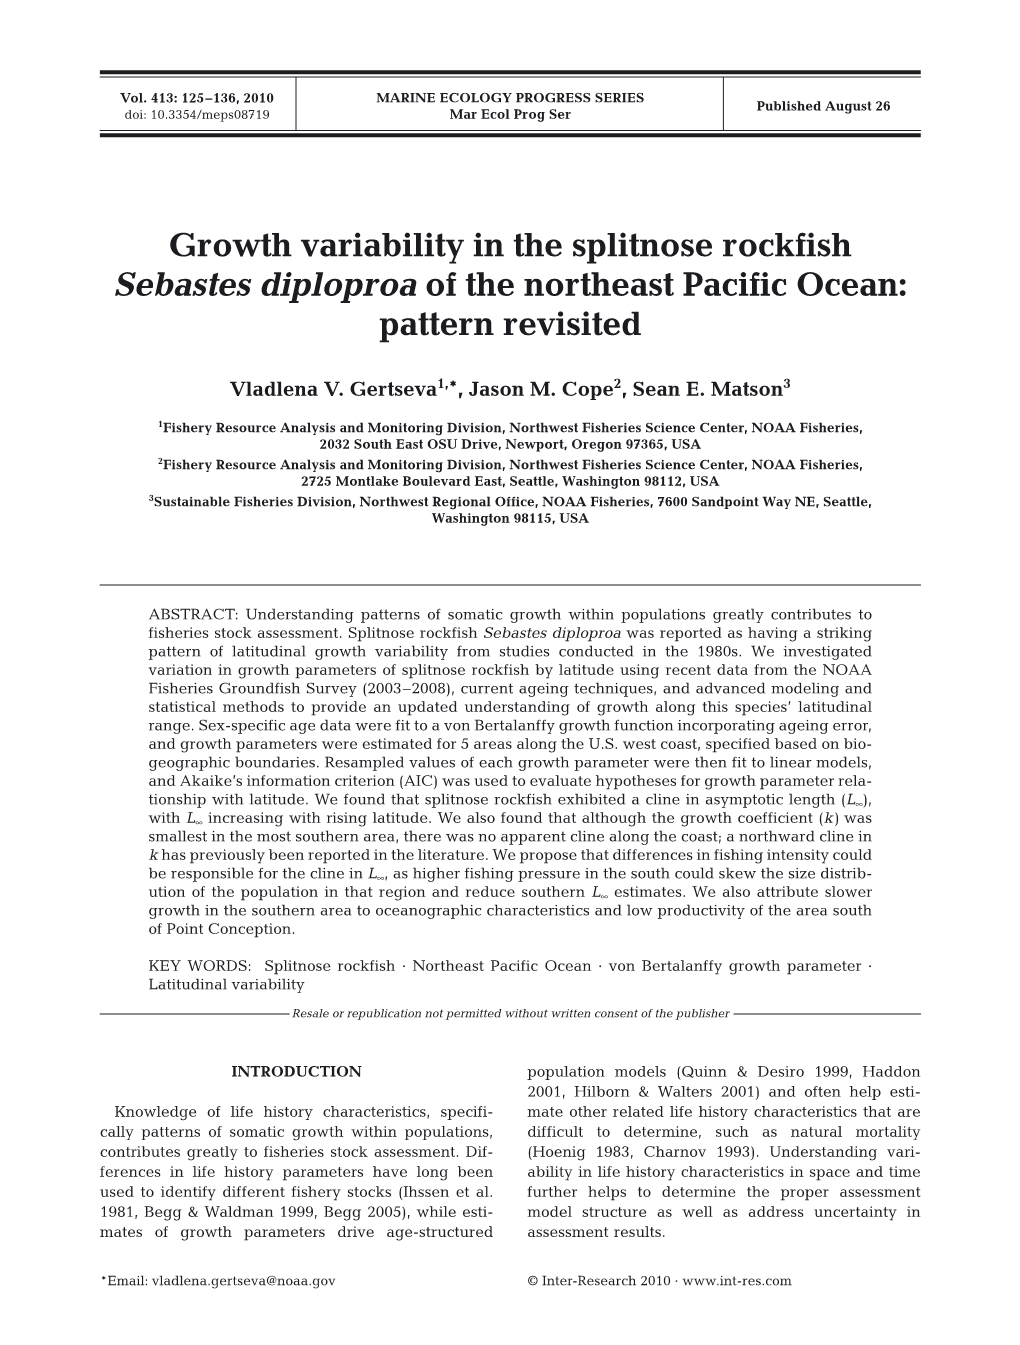 Growth Variability in the Splitnose Rockfish Sebastes Diploproa of the Northeast Pacific Ocean: Pattern Revisited